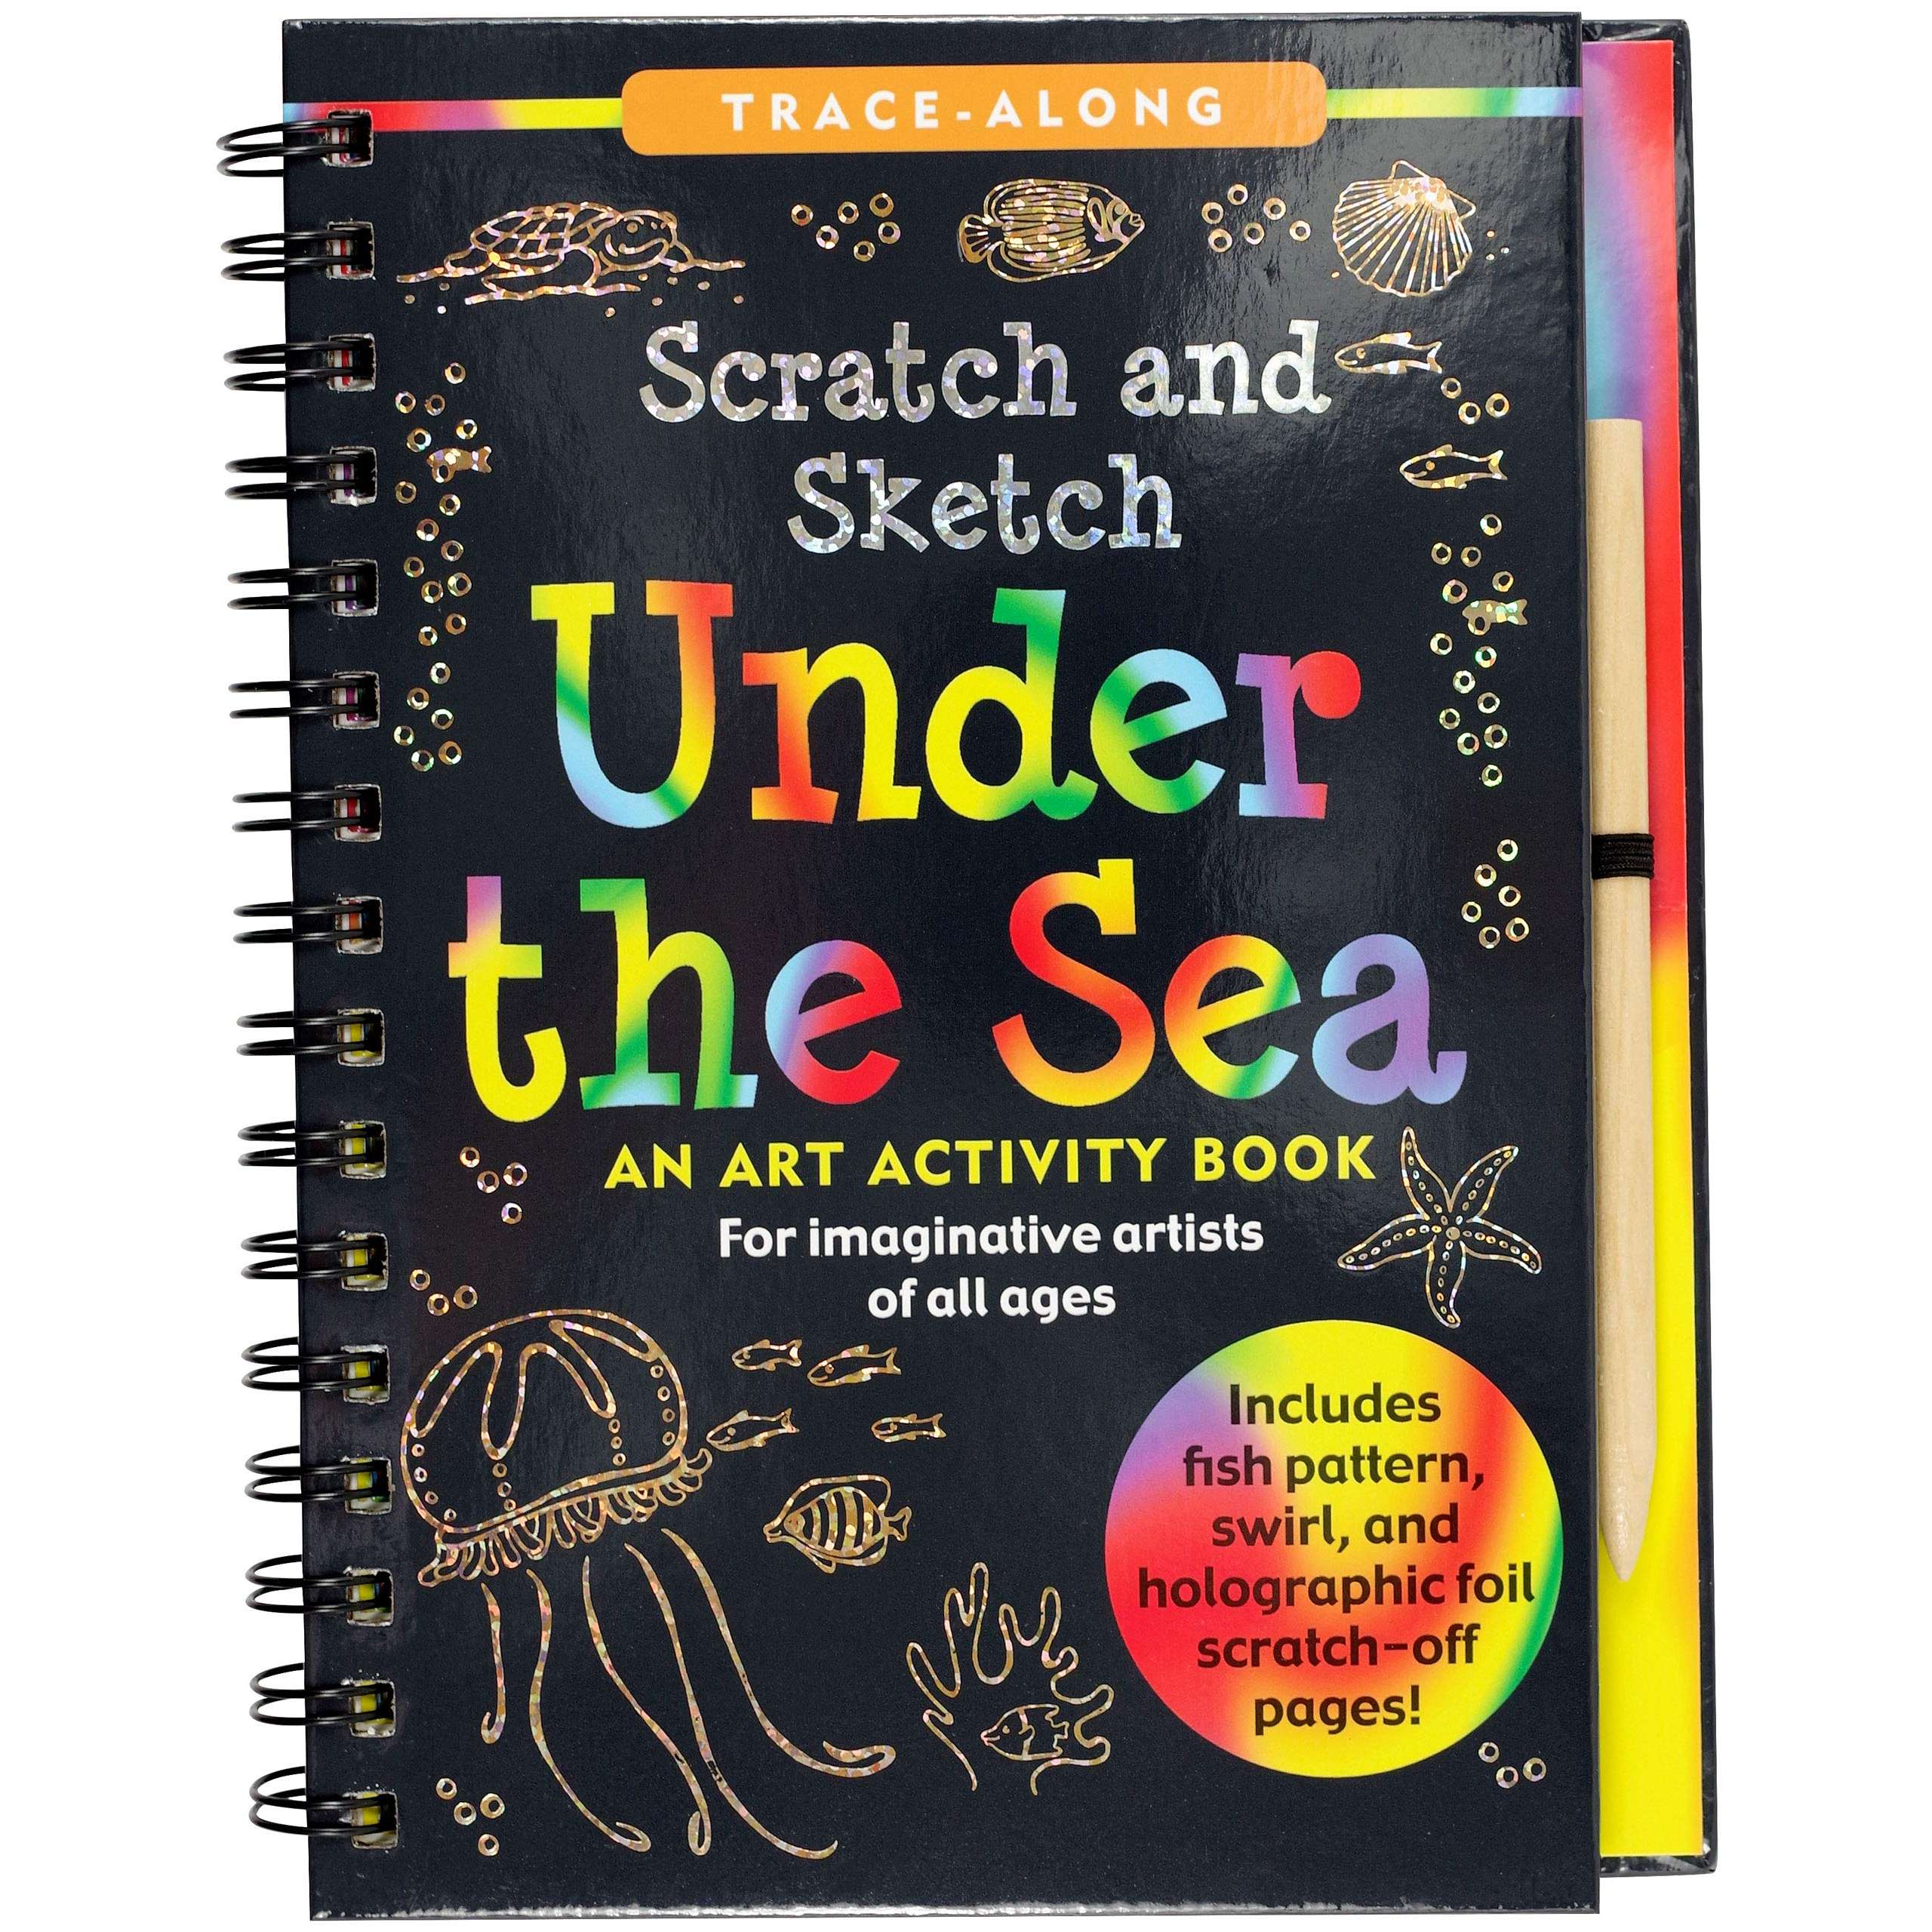 about　Navigational　Fish　Sea　Cay　Children's　::　::　Books　Under　the　Publishing　Sea　Books,　Paradise　Wholesale　Gifts,　Kids　On　::　All　About　Books　Scratch　Charts,　Books　Sketch　Life　Animals　Demand